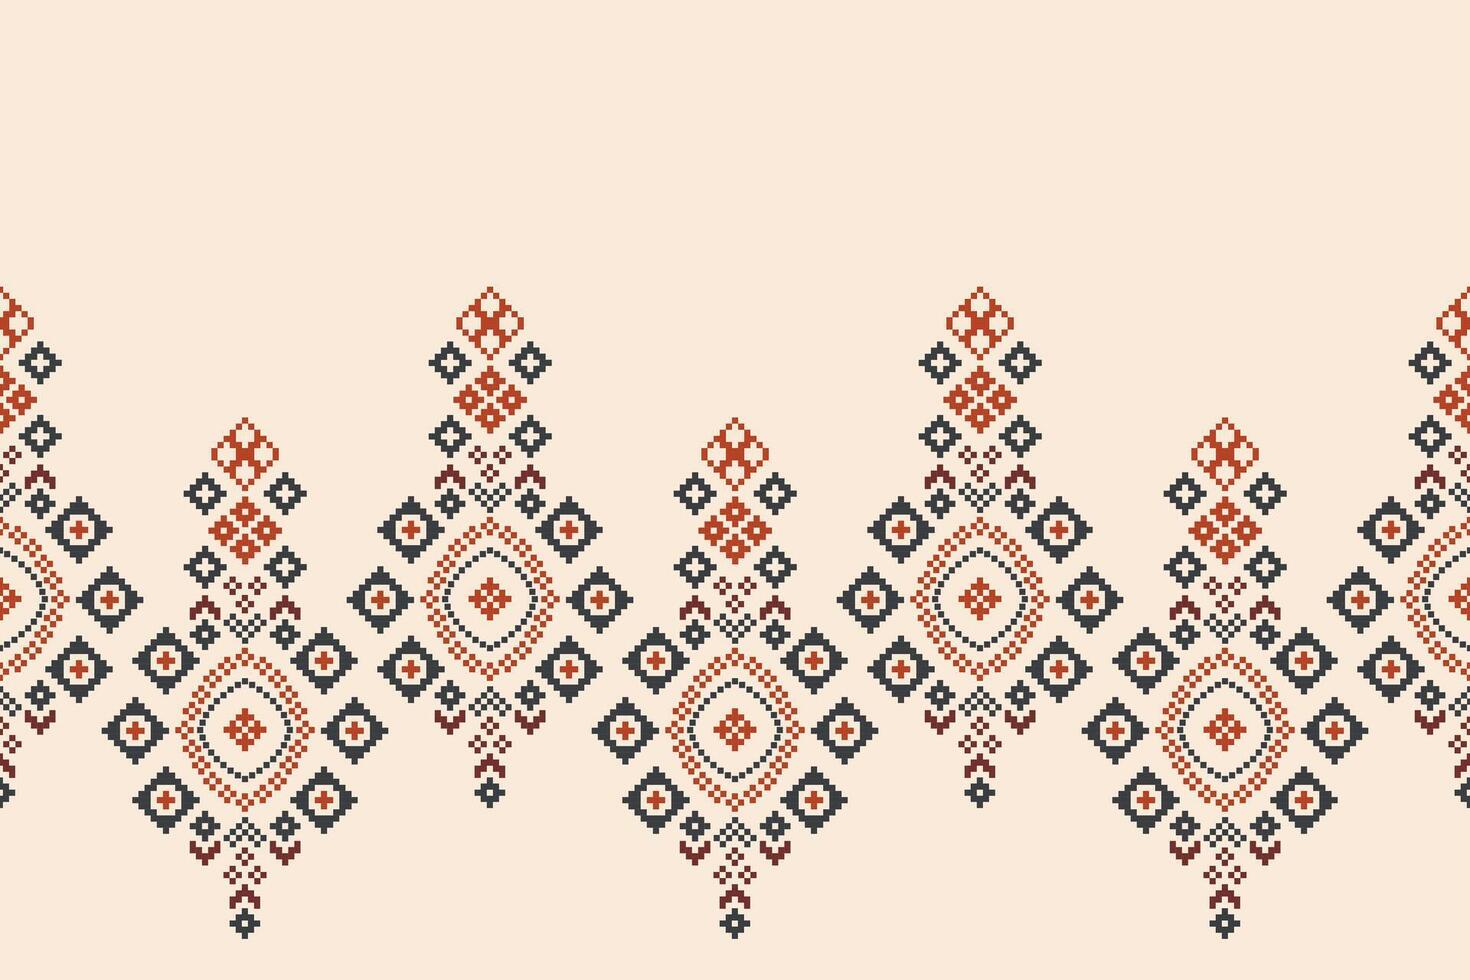 Traditional ethnic motifs ikat geometric fabric pattern cross stitch.Ikat embroidery Ethnic oriental Pixel brown cream background. Abstract,vector,illustration. Texture,scarf,decoration,wallpaper. vector